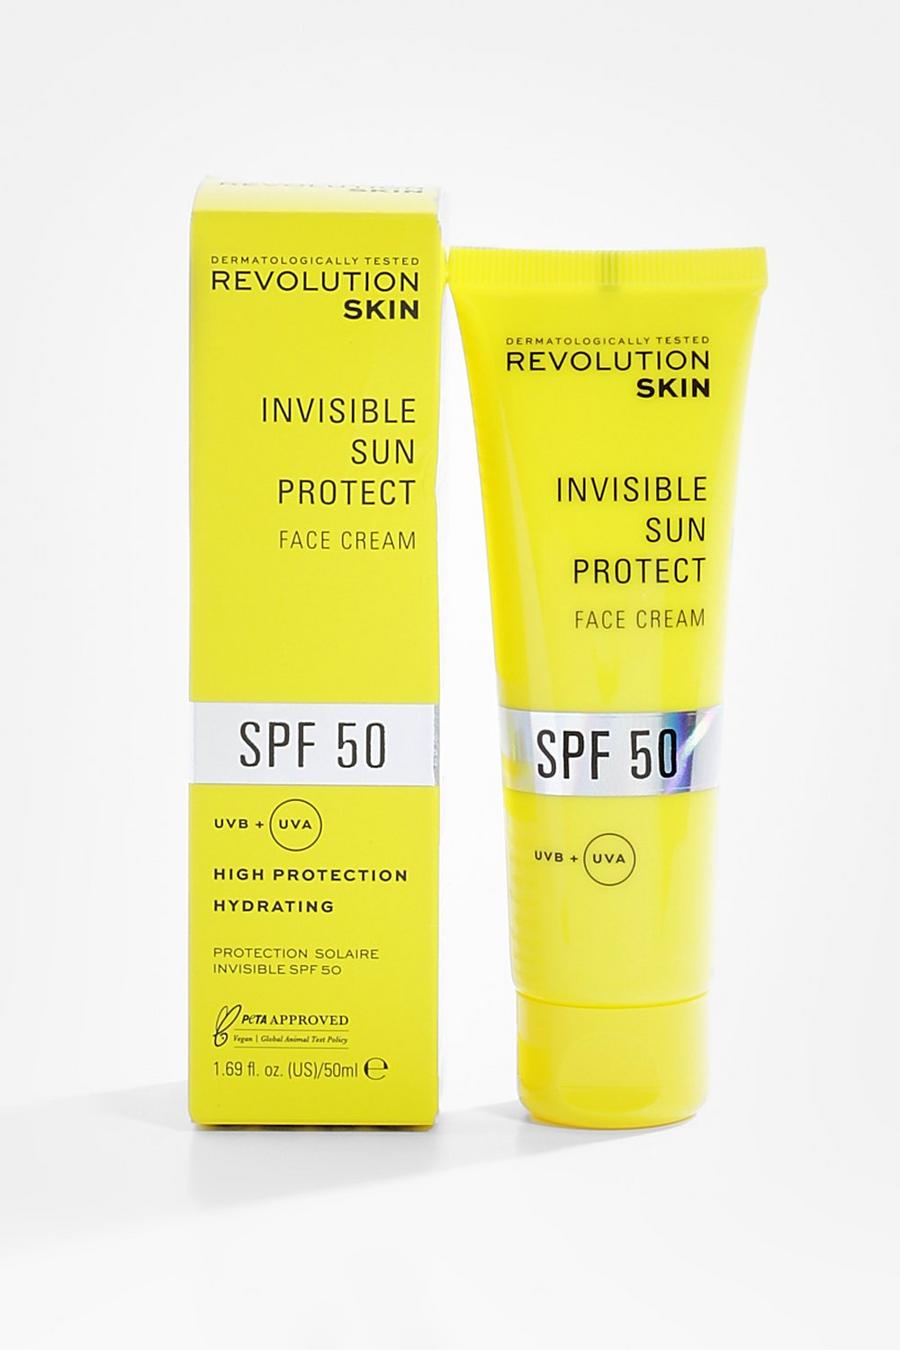 Clear transparent Revolution Skincare SPF 50 Invisible Protect Sunscreen